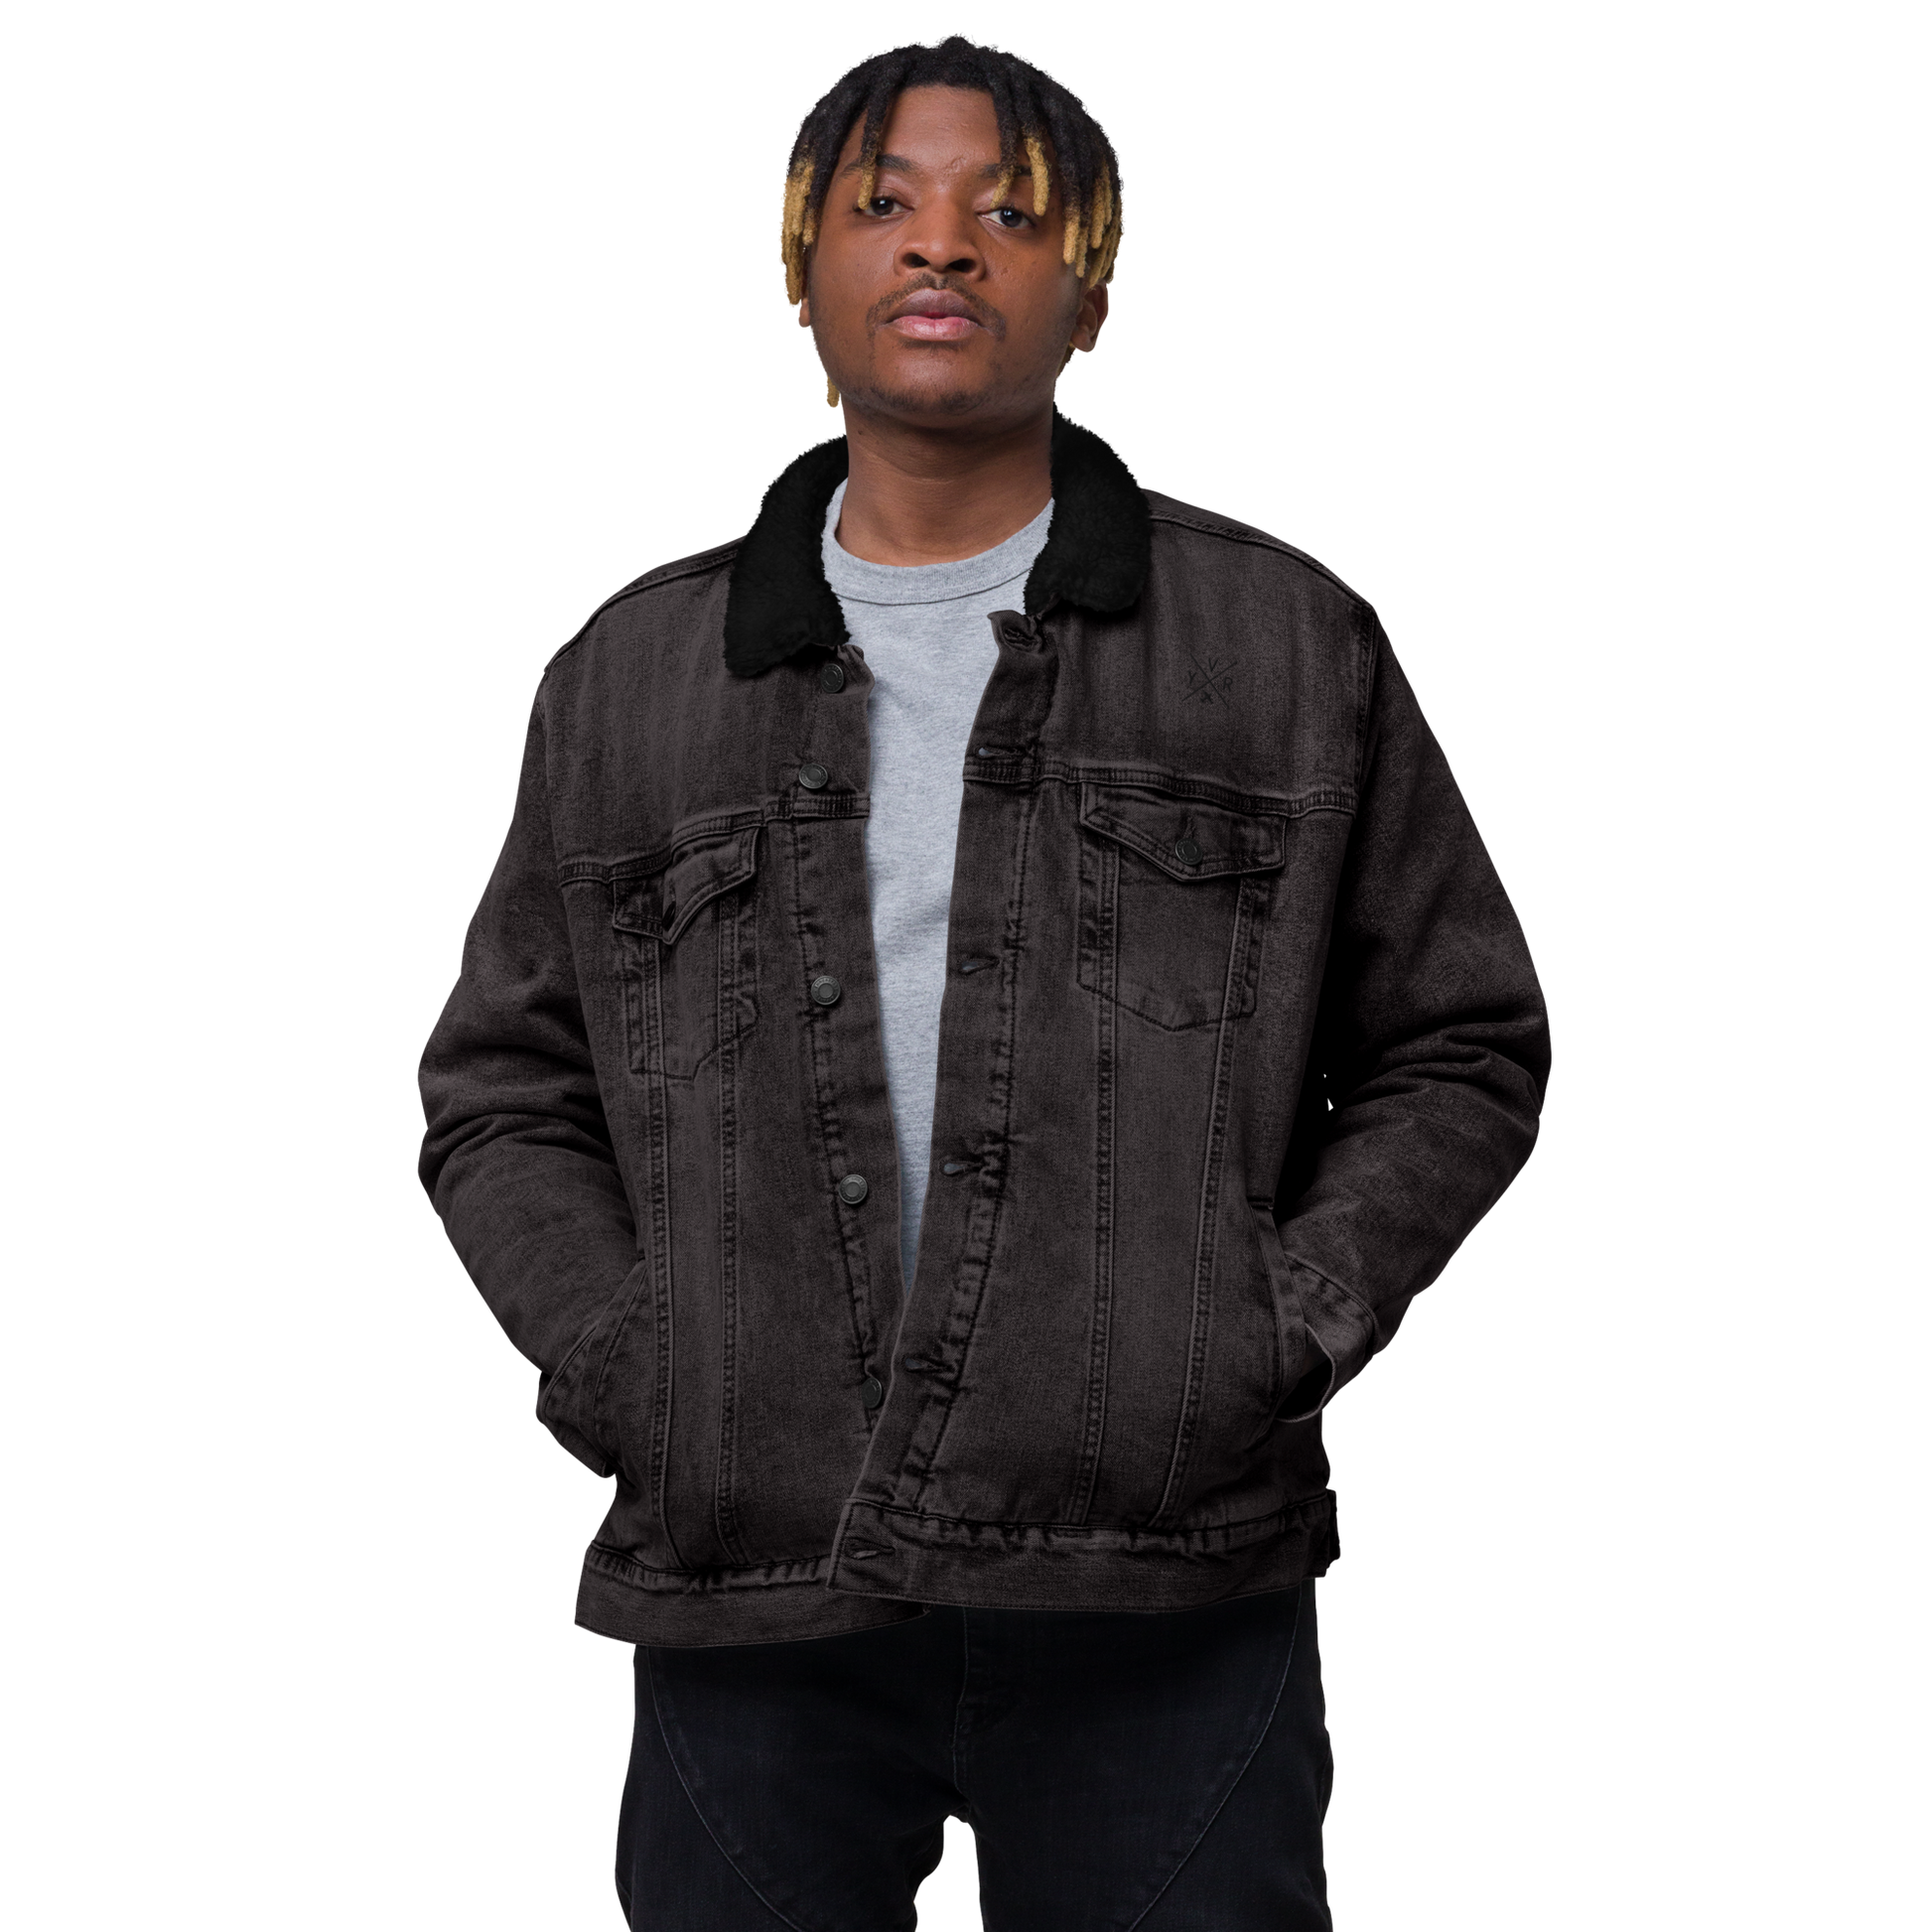 YHM Designs - YVR Vancouver Denim Sherpa Jacket - Crossed-X Design with Airport Code and Vintage Propliner - Black & White Embroidery - Image 01